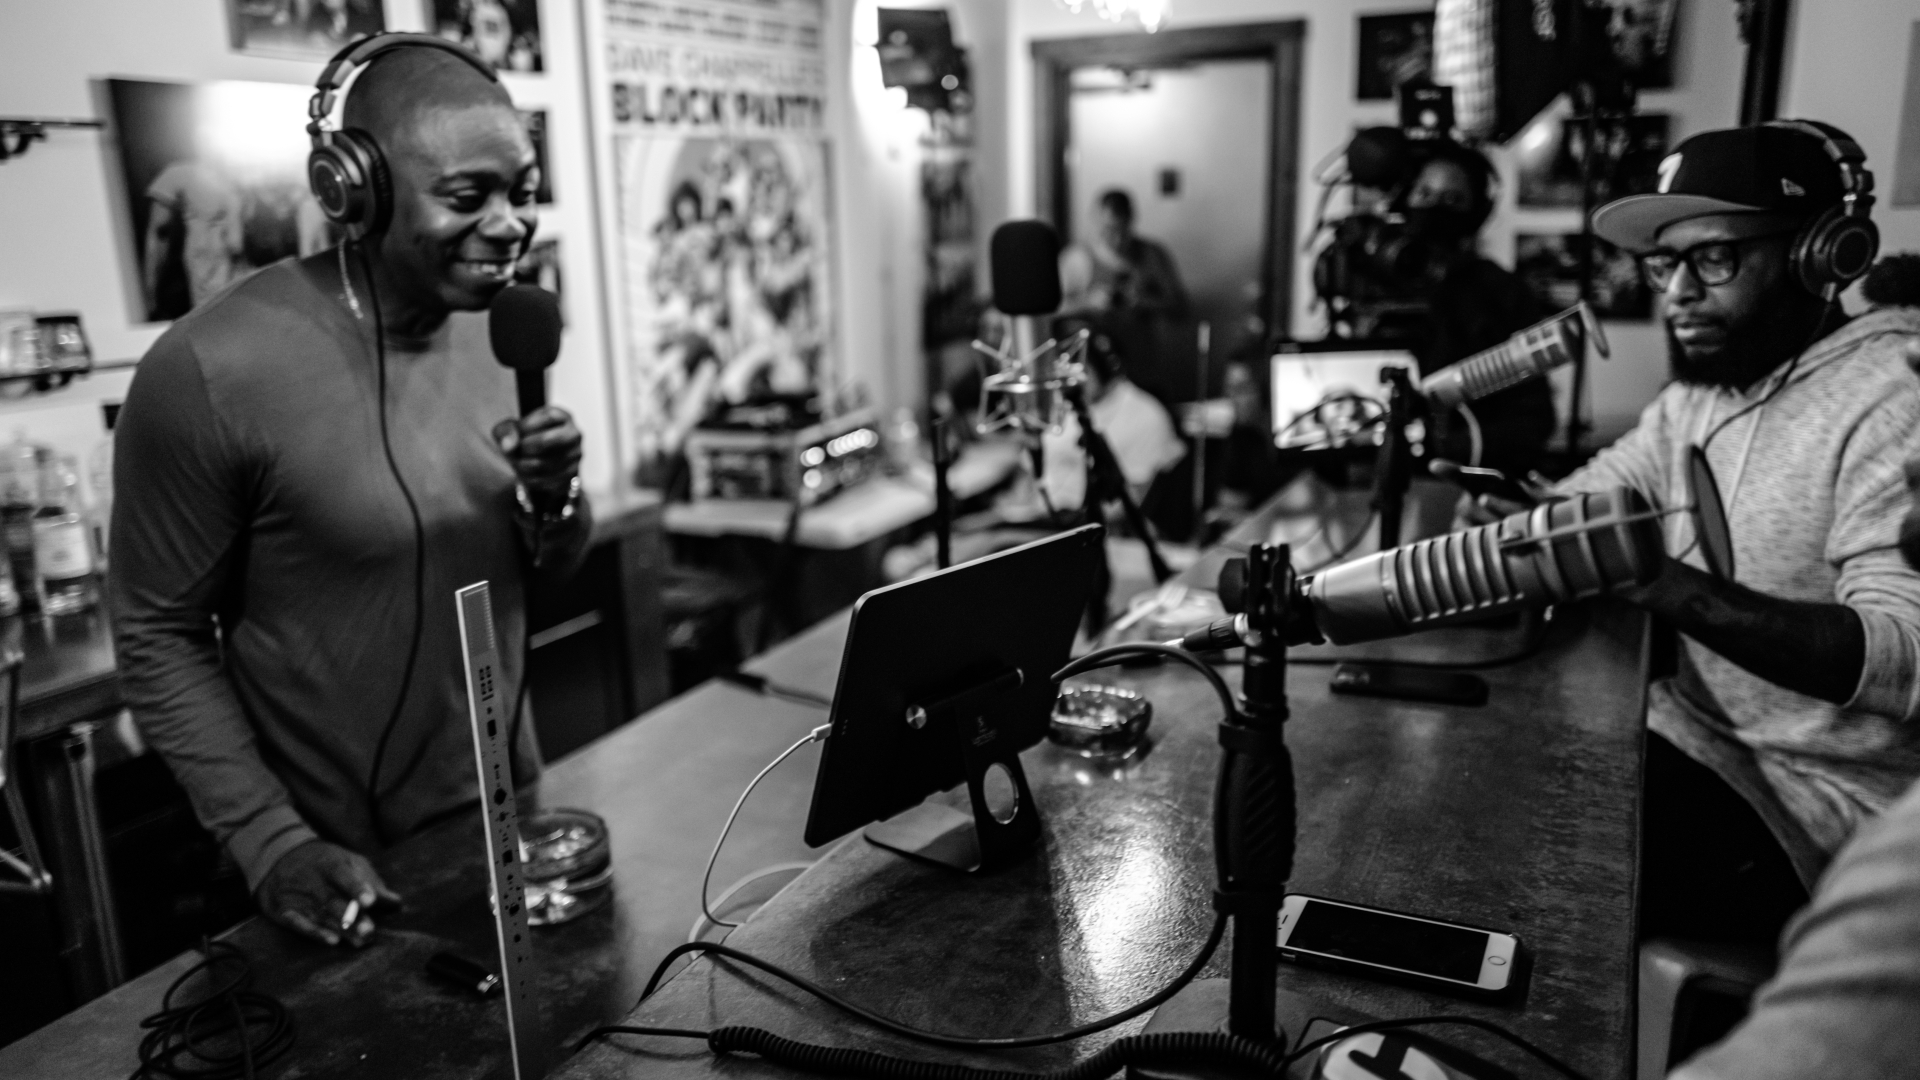 Dave Chappelle, Talib Kweli, and Yasiin Bey (Mos Def) Launch Podcast, 'The  Midnight Miracle